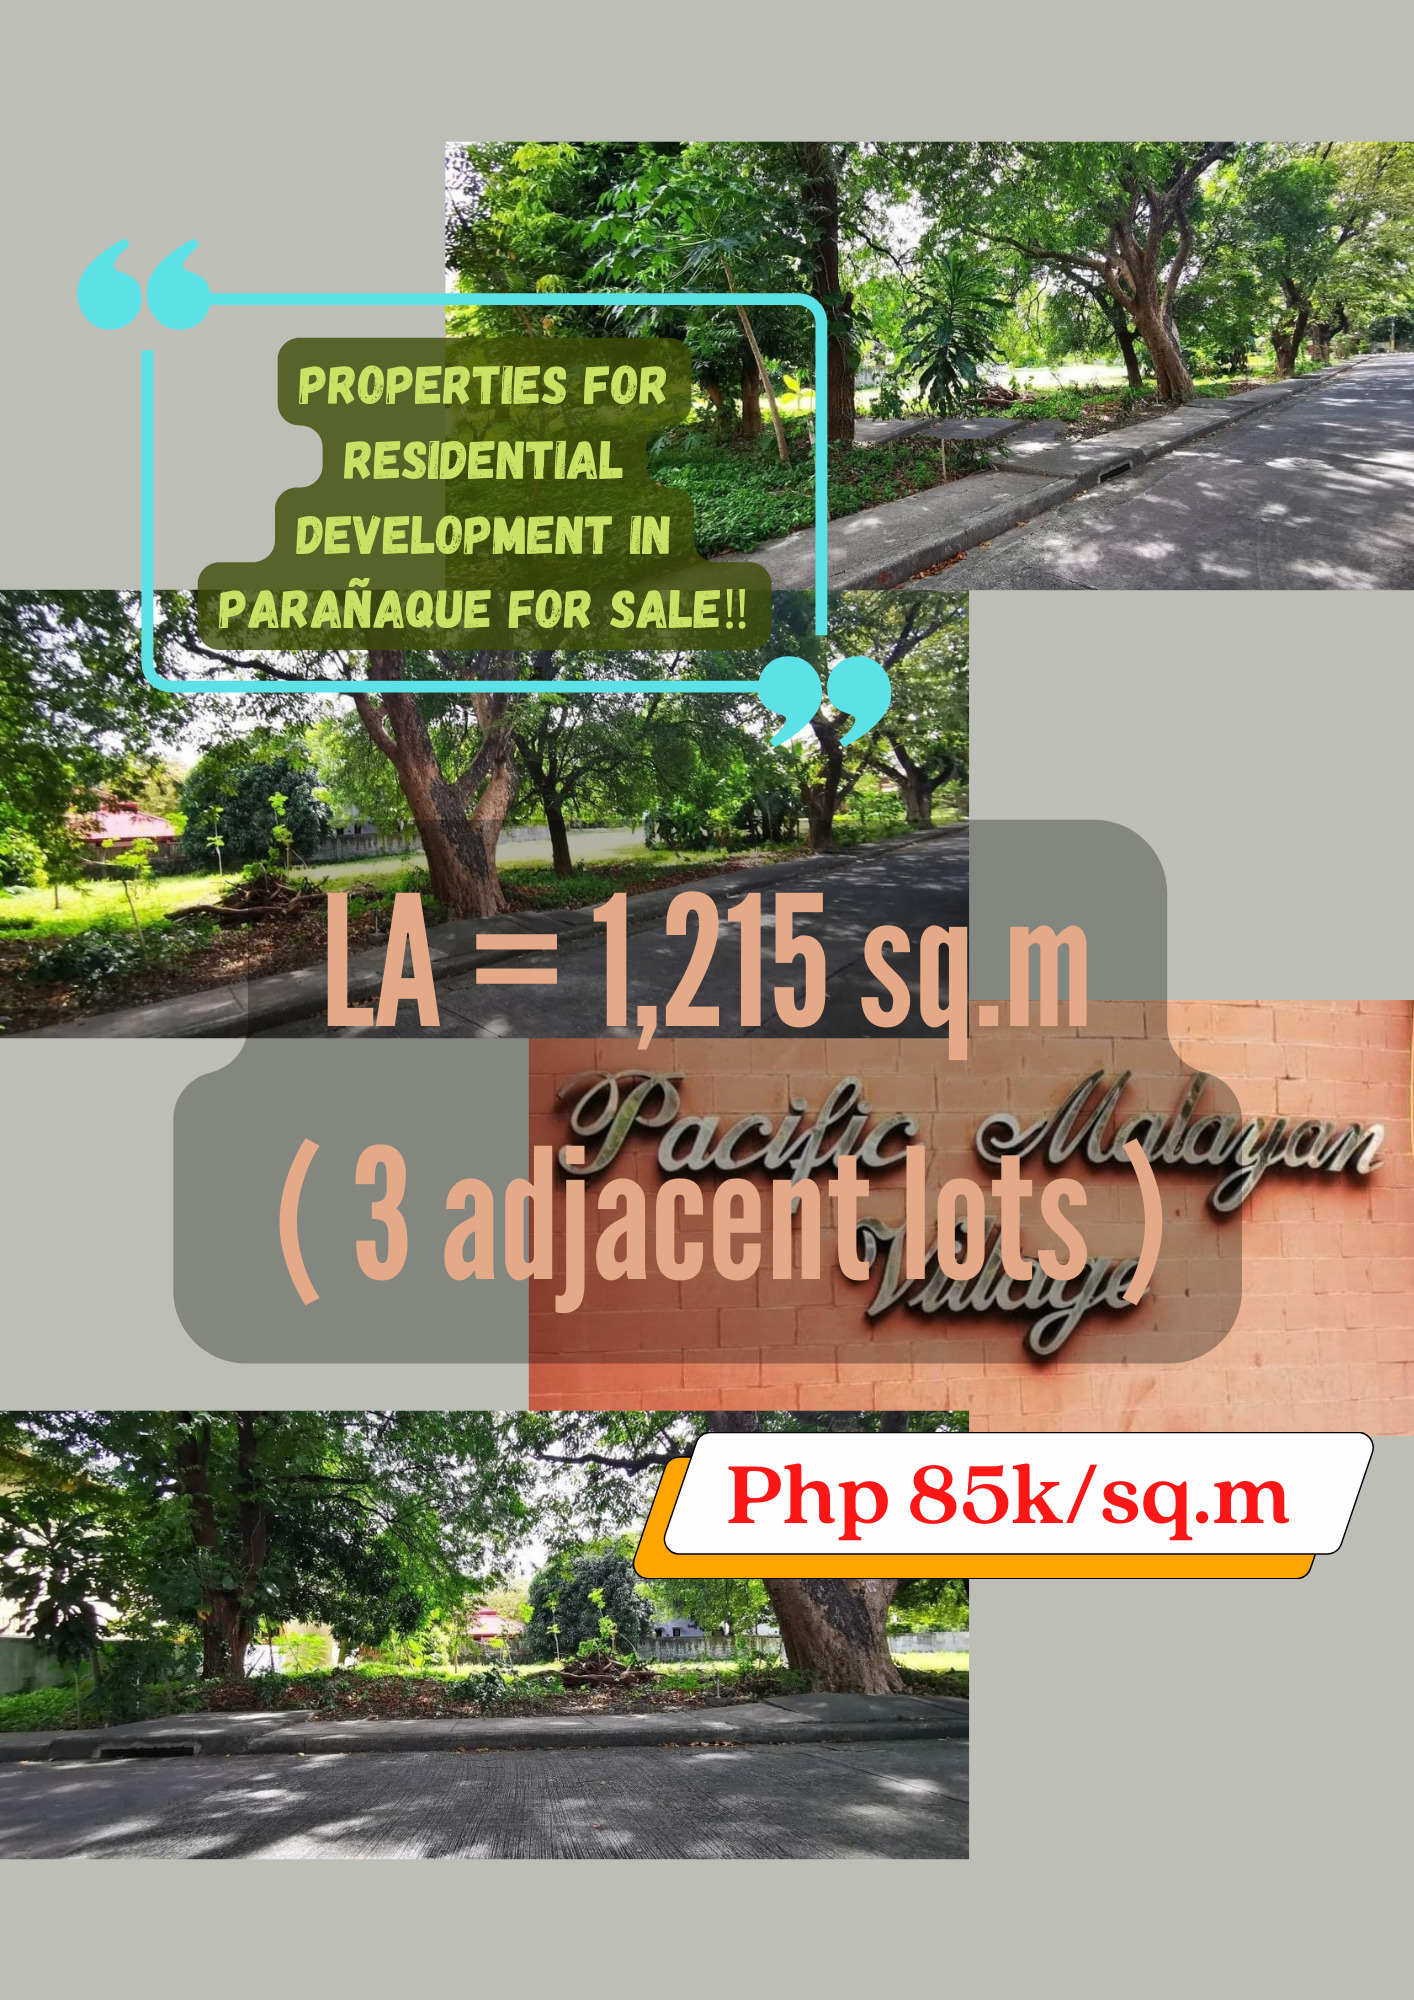 PROPERTIES FOR RESIDENTIAL DEVELOPMENT in Parañaque for Sale‼️